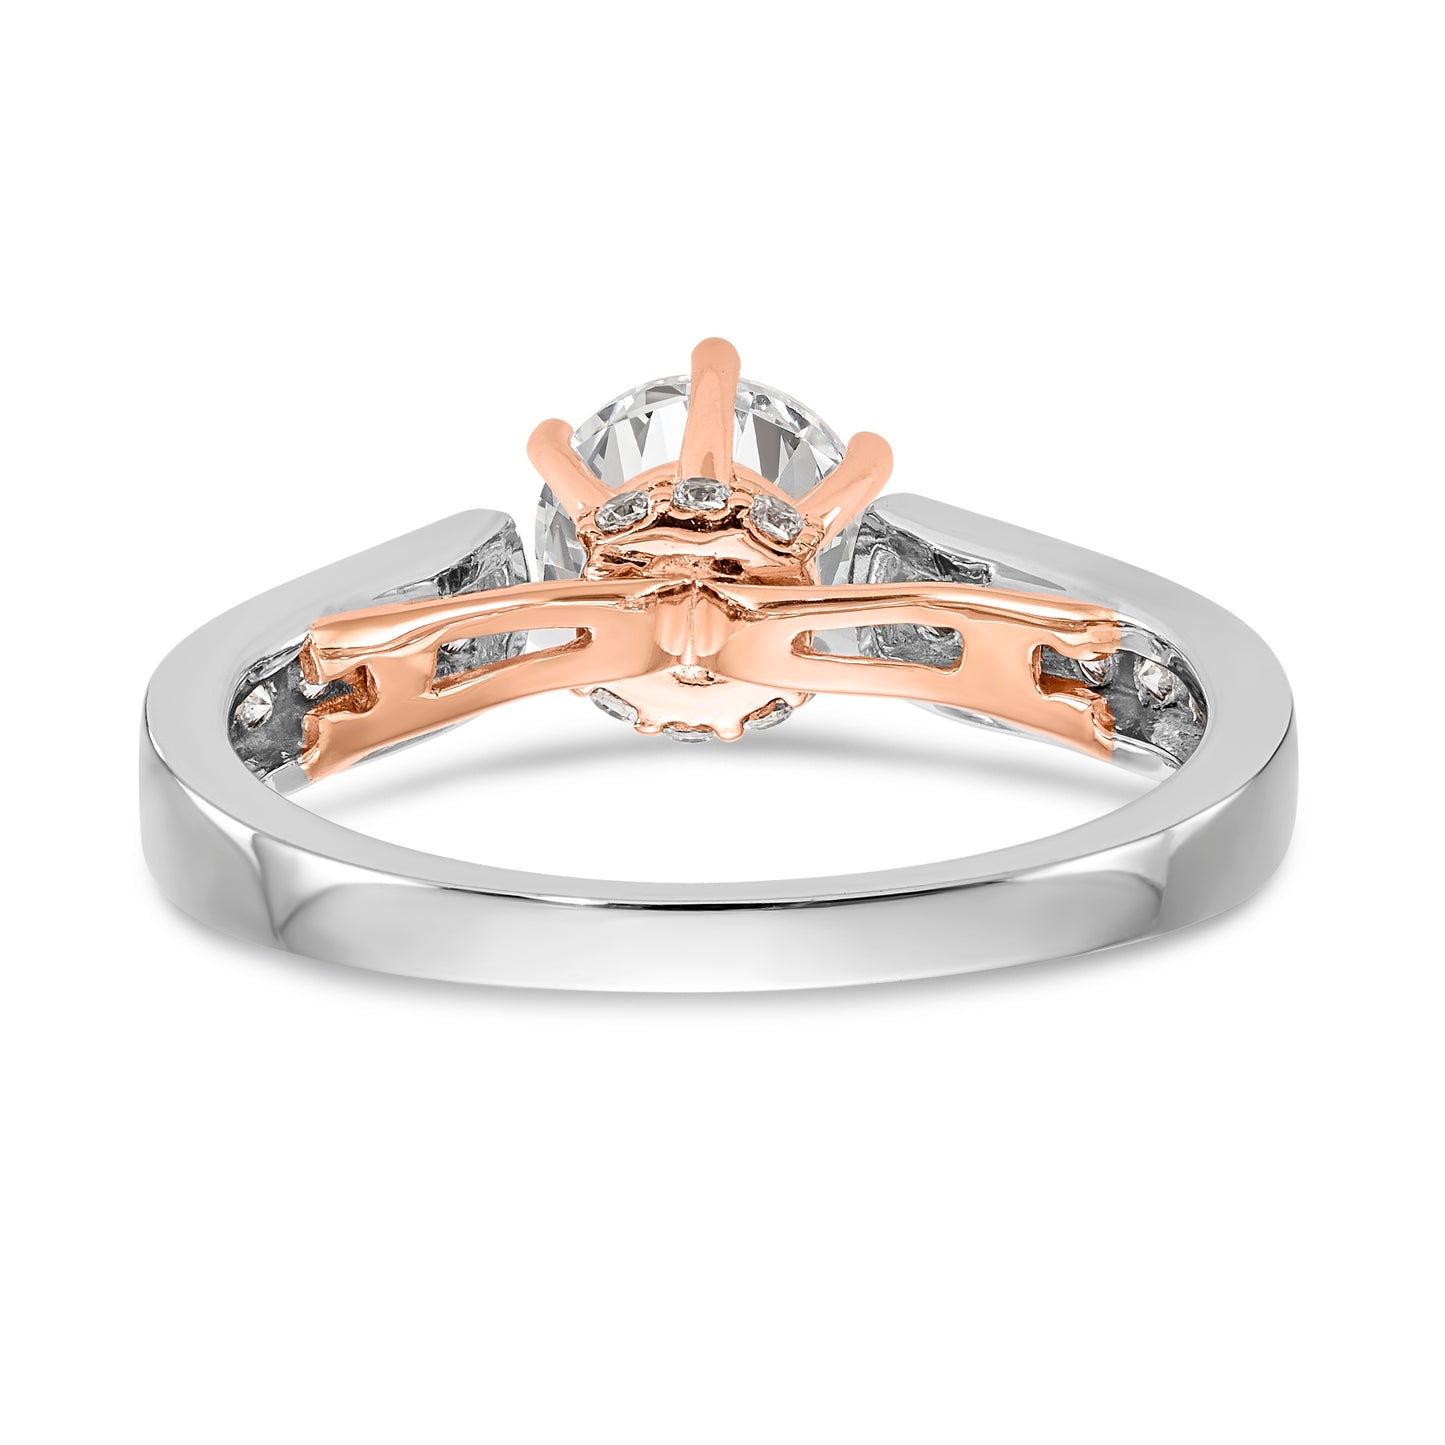 14K White Gold and Rose Simulated Diamond Engagement Ring